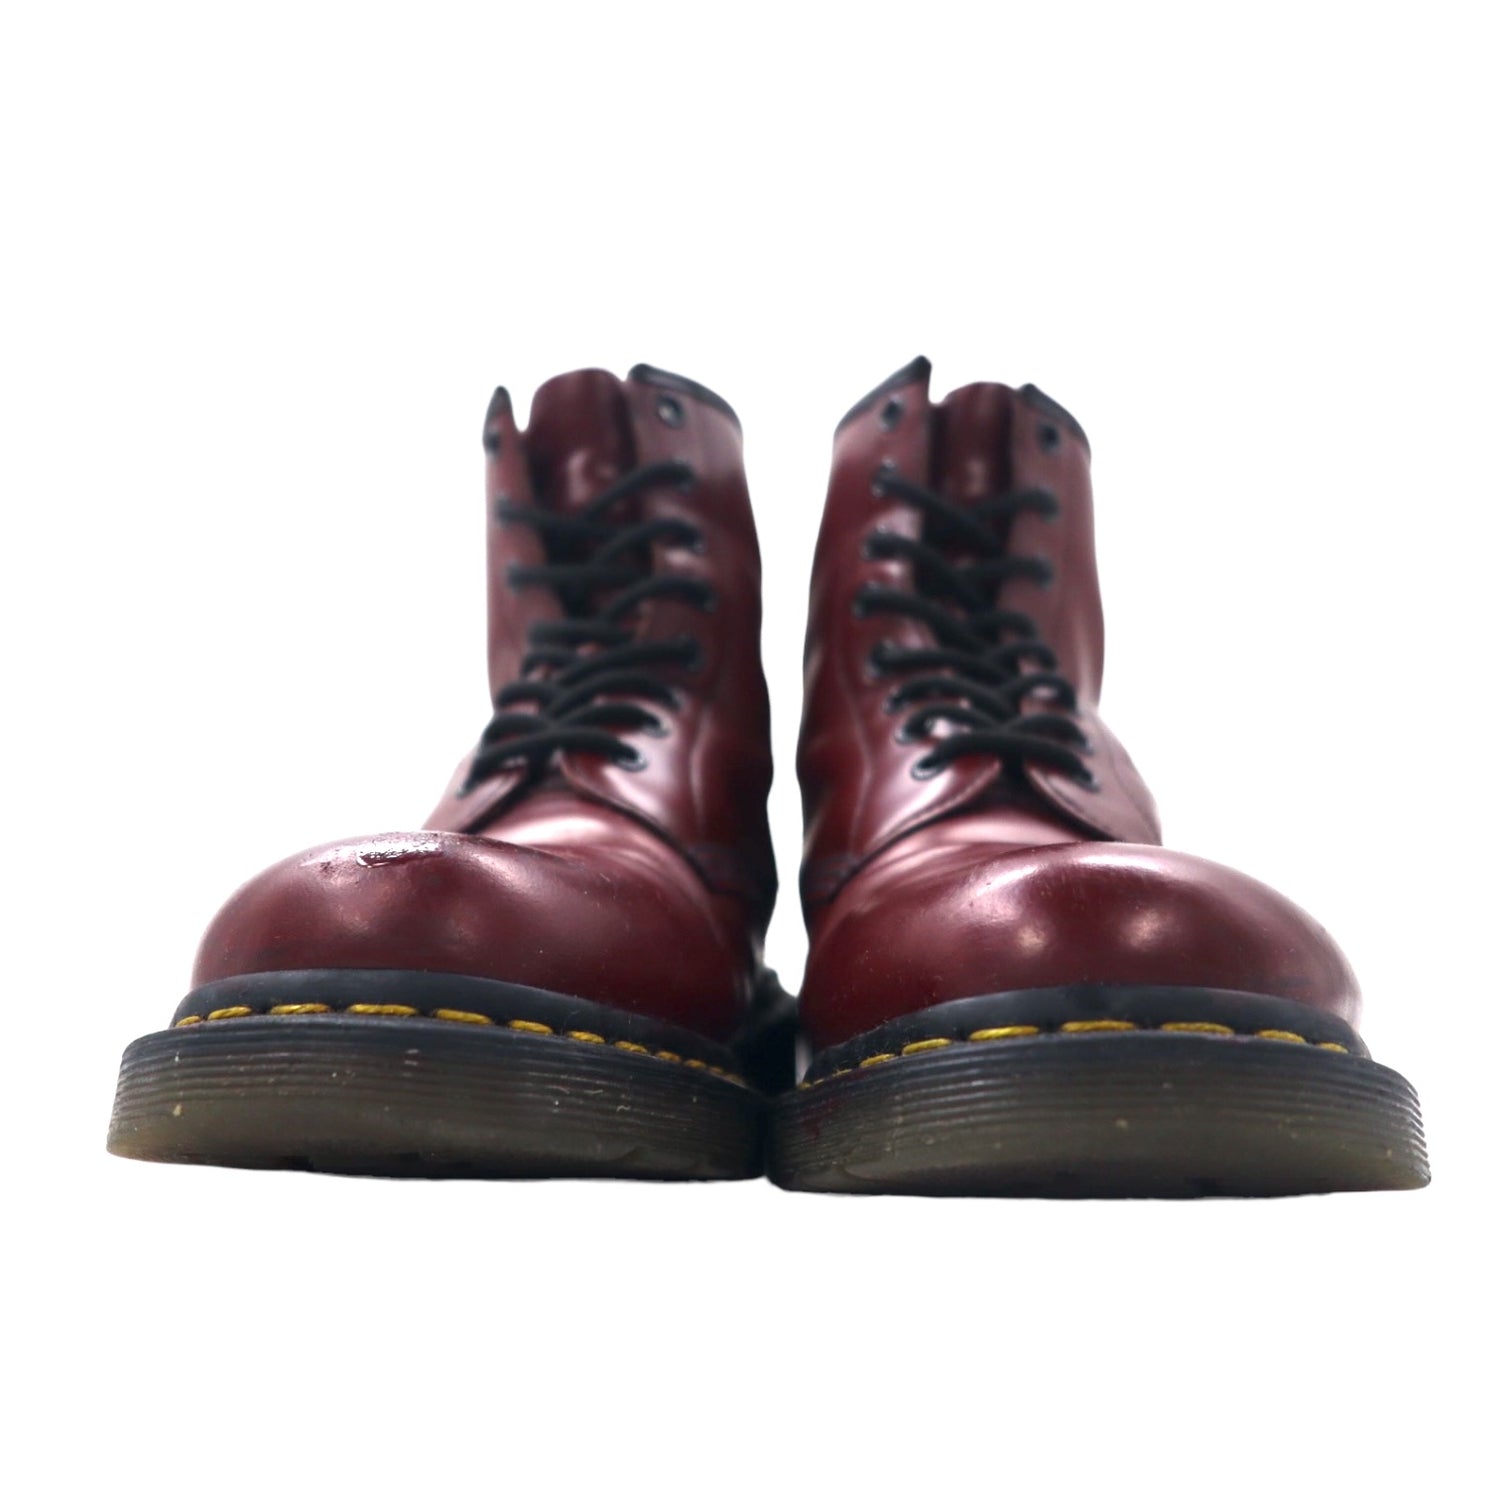 Dr. Martens 8 Hole Lace Up Boots US10 Red Leather 8EYE BOOT 11822